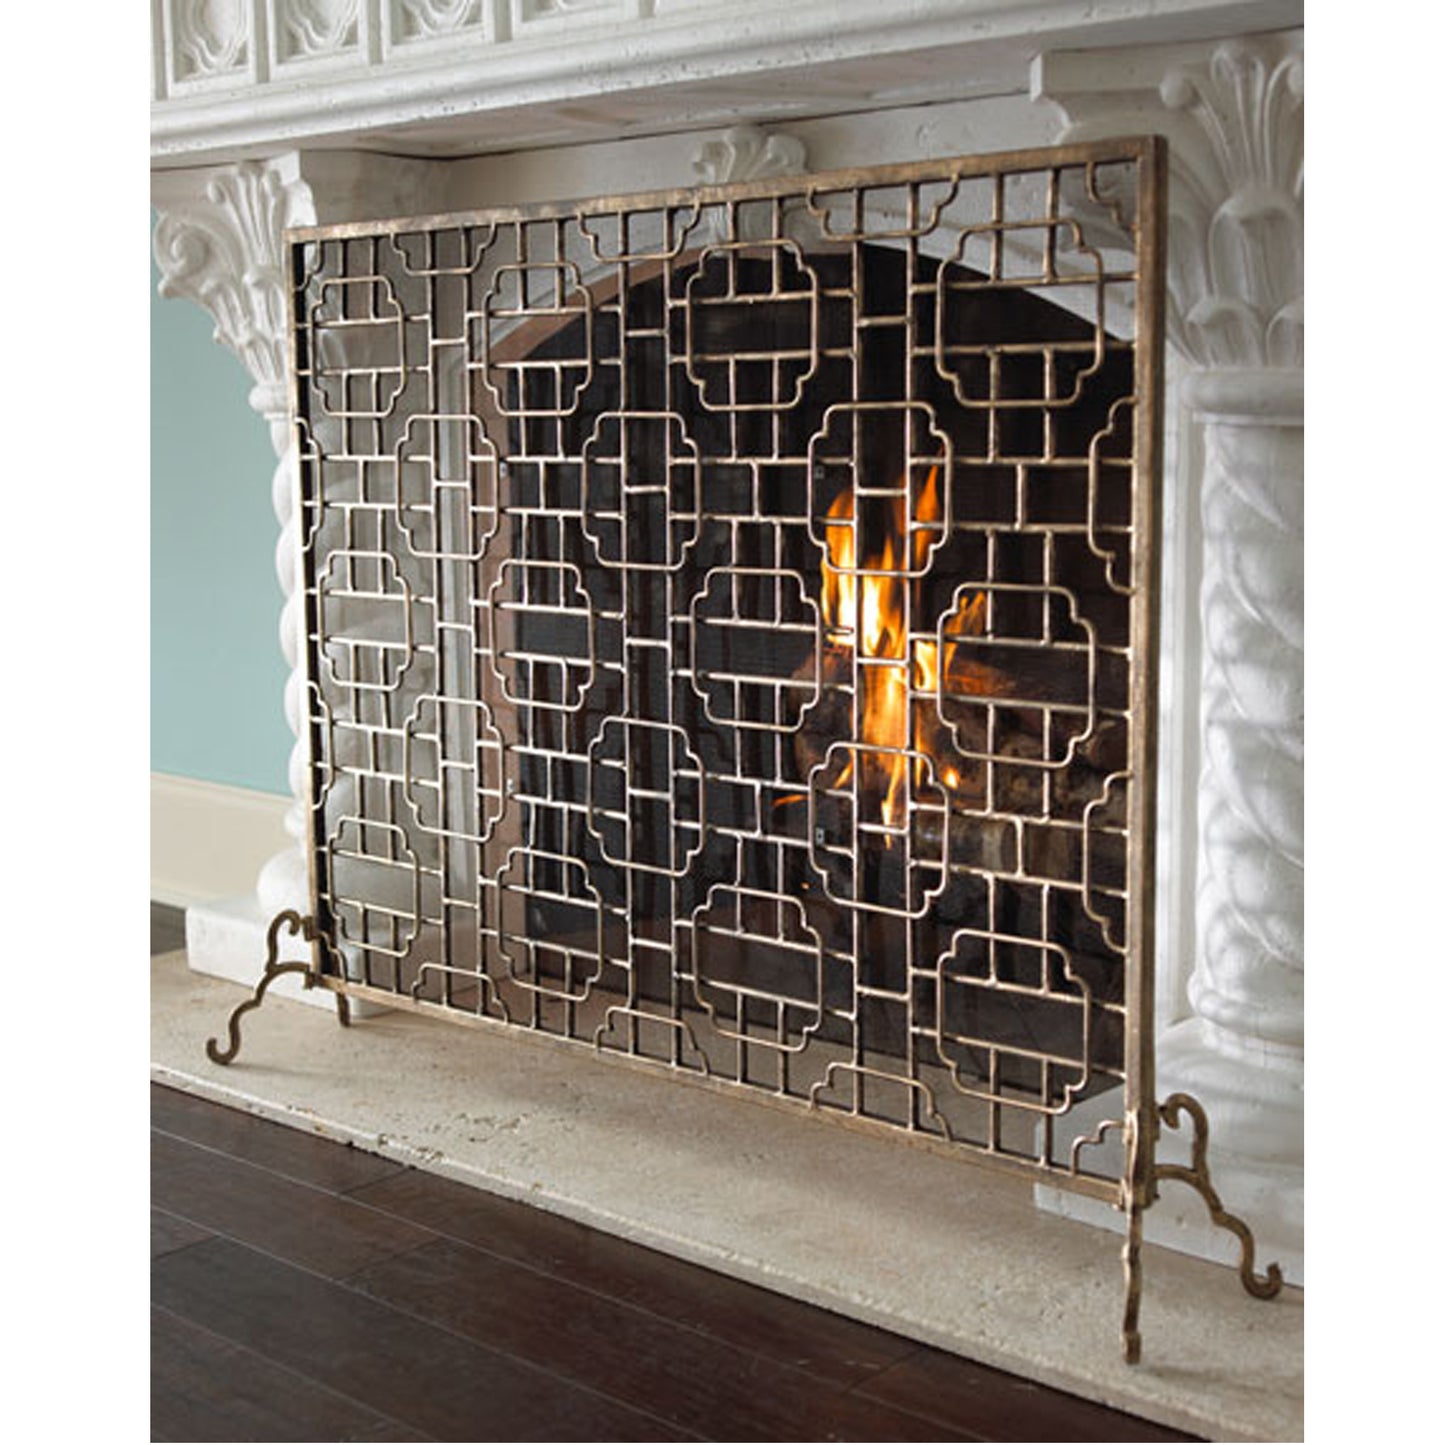 Fireplace Screen in Light Burnished Gold Geometric Design